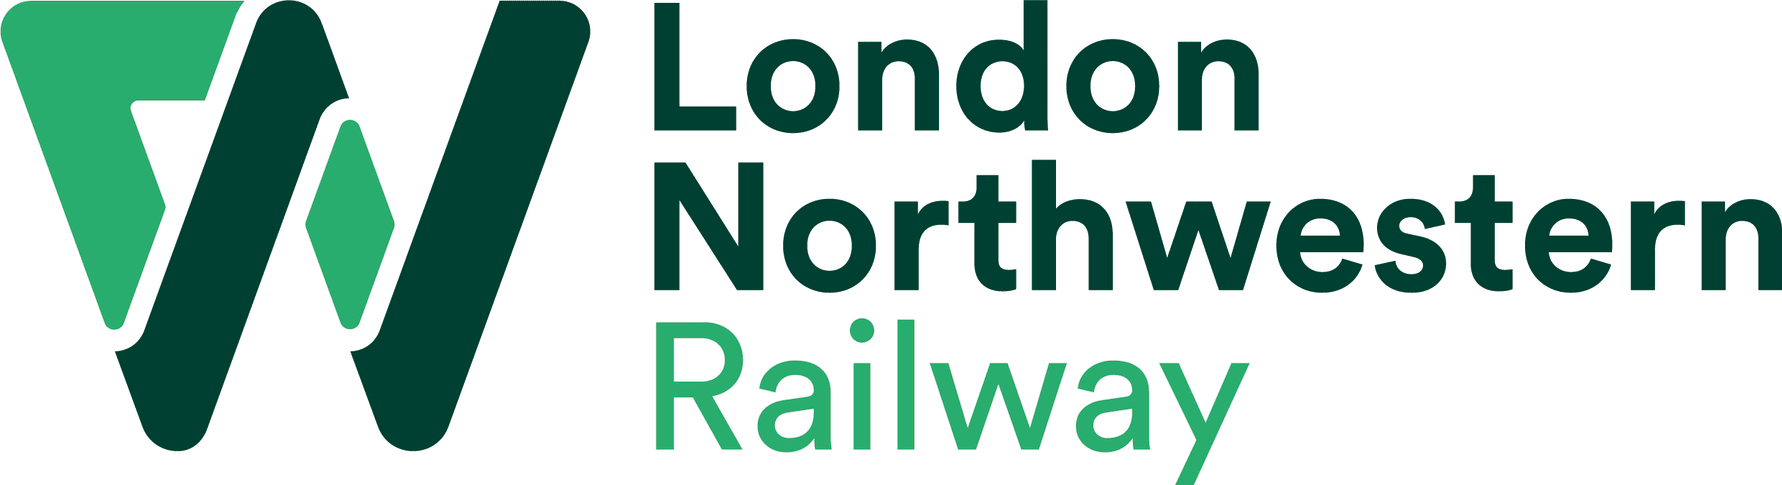 London Northwestern Railway to operate revised timetable from Monday 23 March